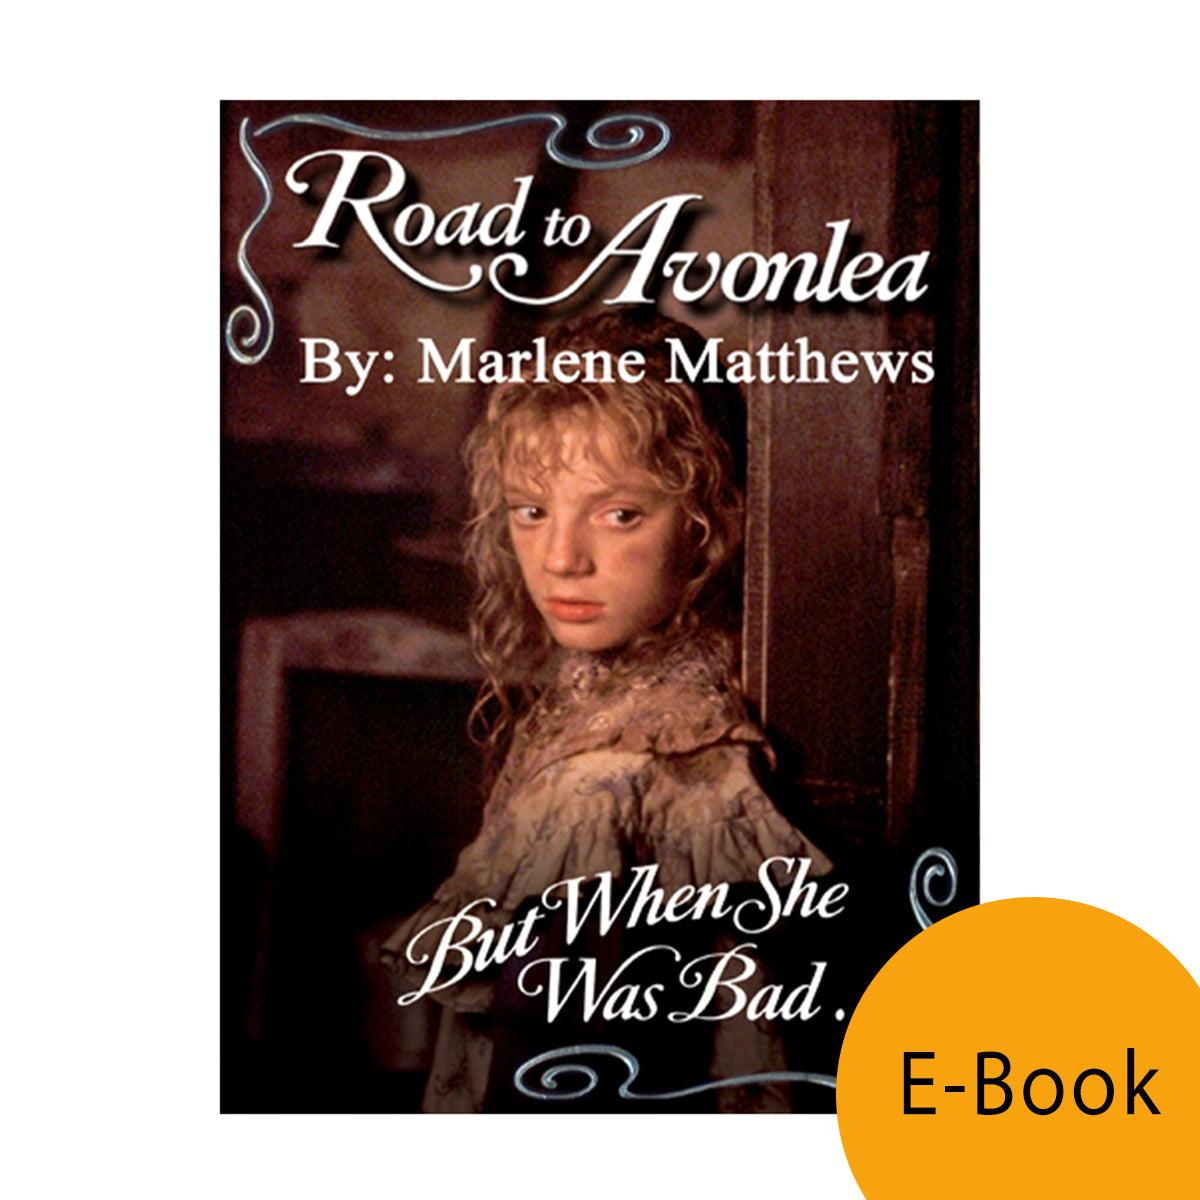 But When She Was Bad (Road to Avonlea Book 23)-ebook